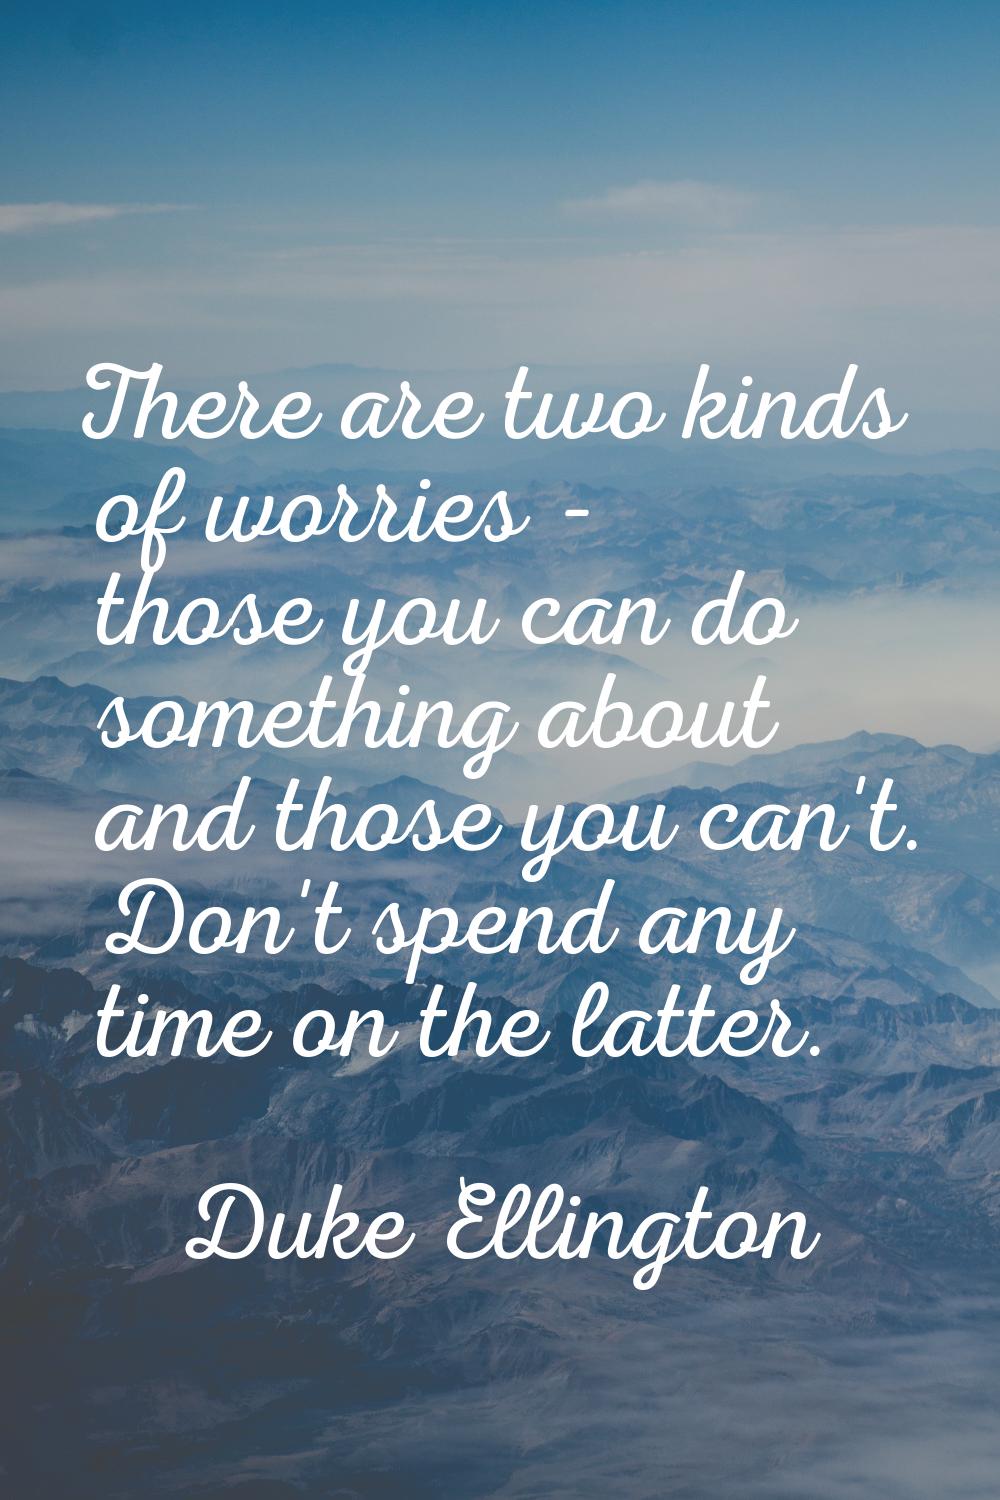 There are two kinds of worries - those you can do something about and those you can't. Don't spend 